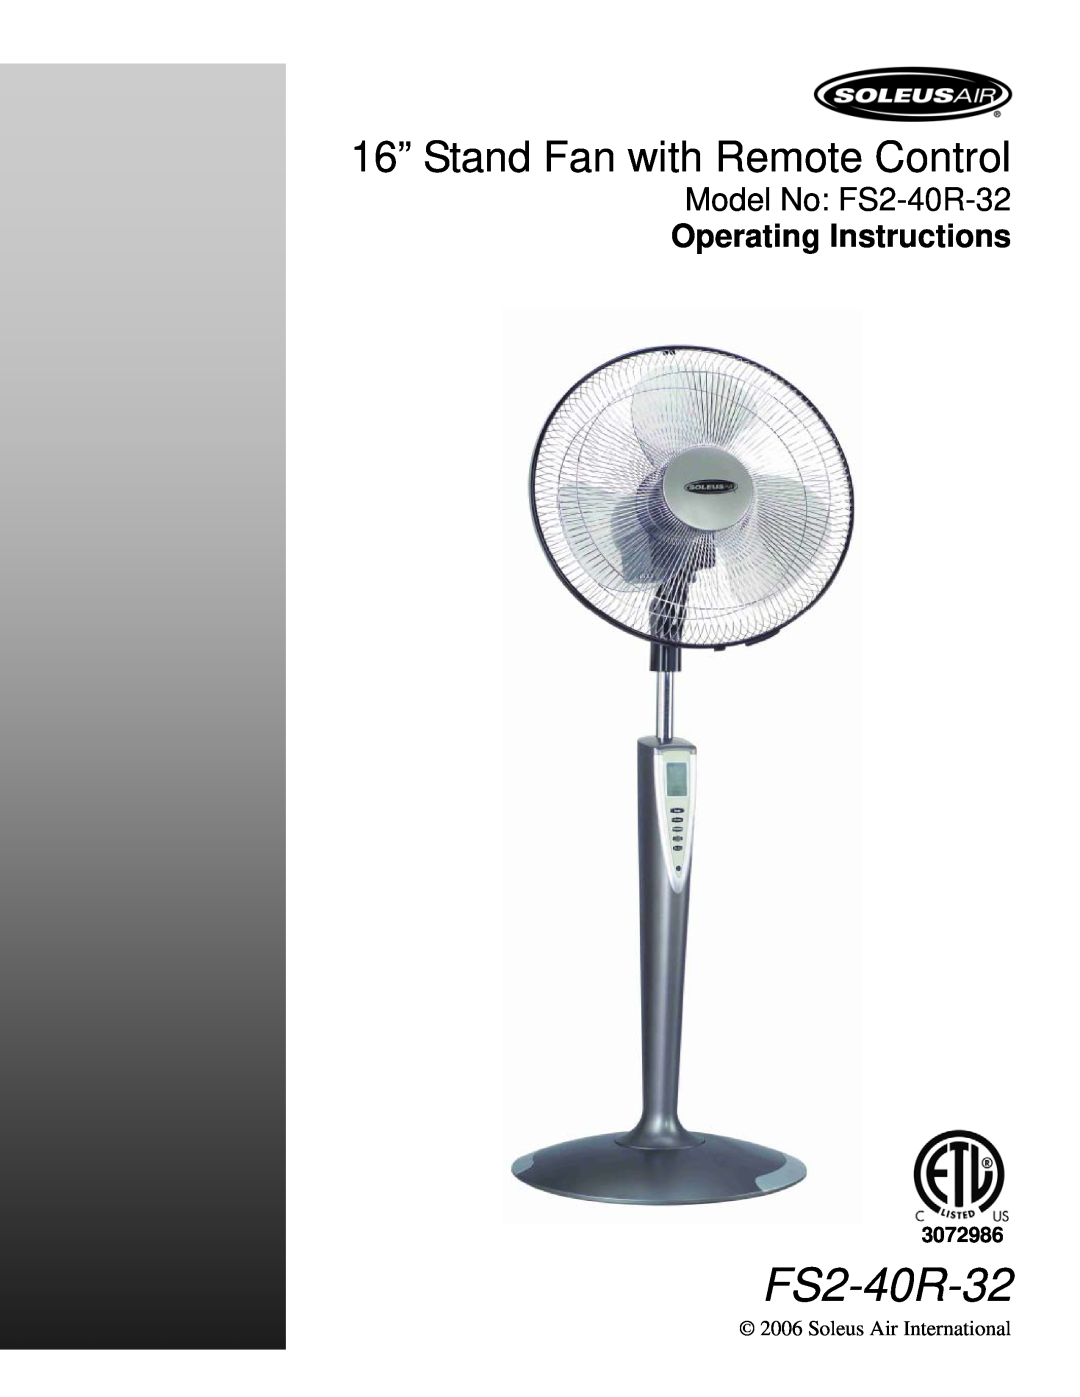 Soleus Air manual 16” Stand Fan with Remote Control, Model No FS2-40R-32, Operating Instructions, 3072986 